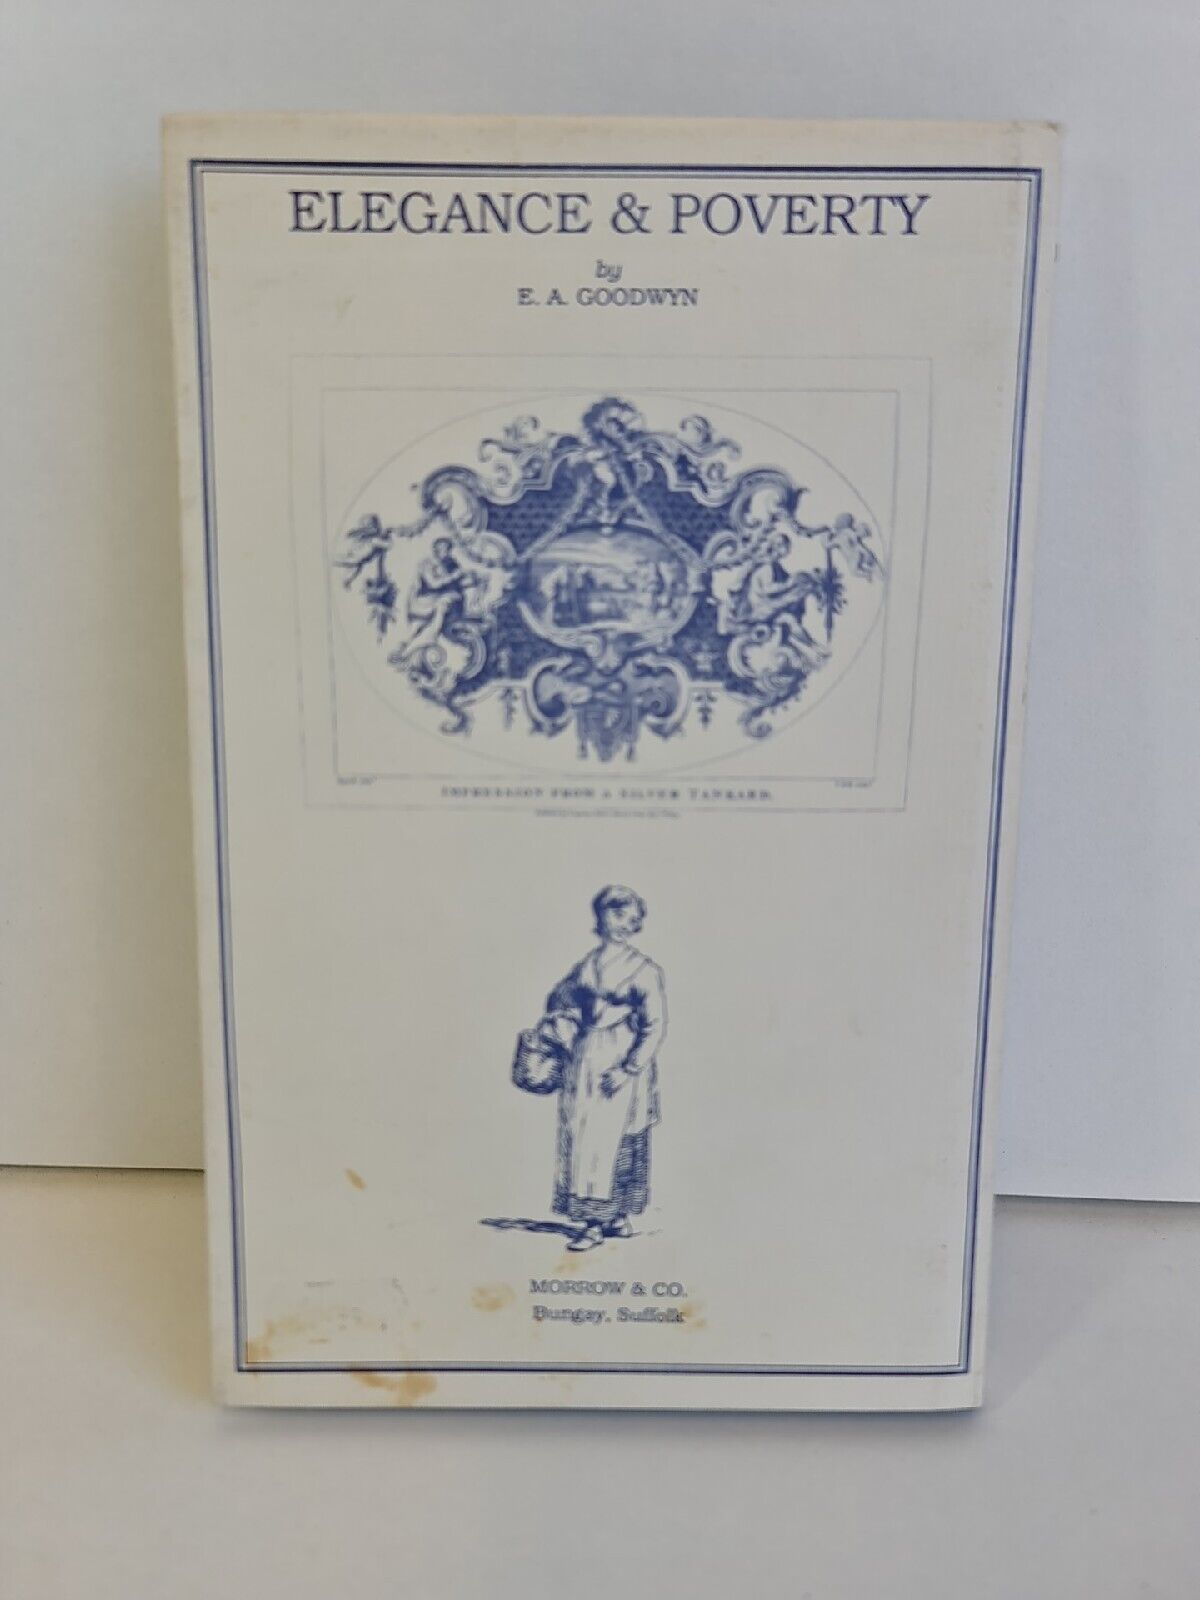 Elegance and Poverty: Bungay in the 18th Century by E.A. Goodwyn (1989)